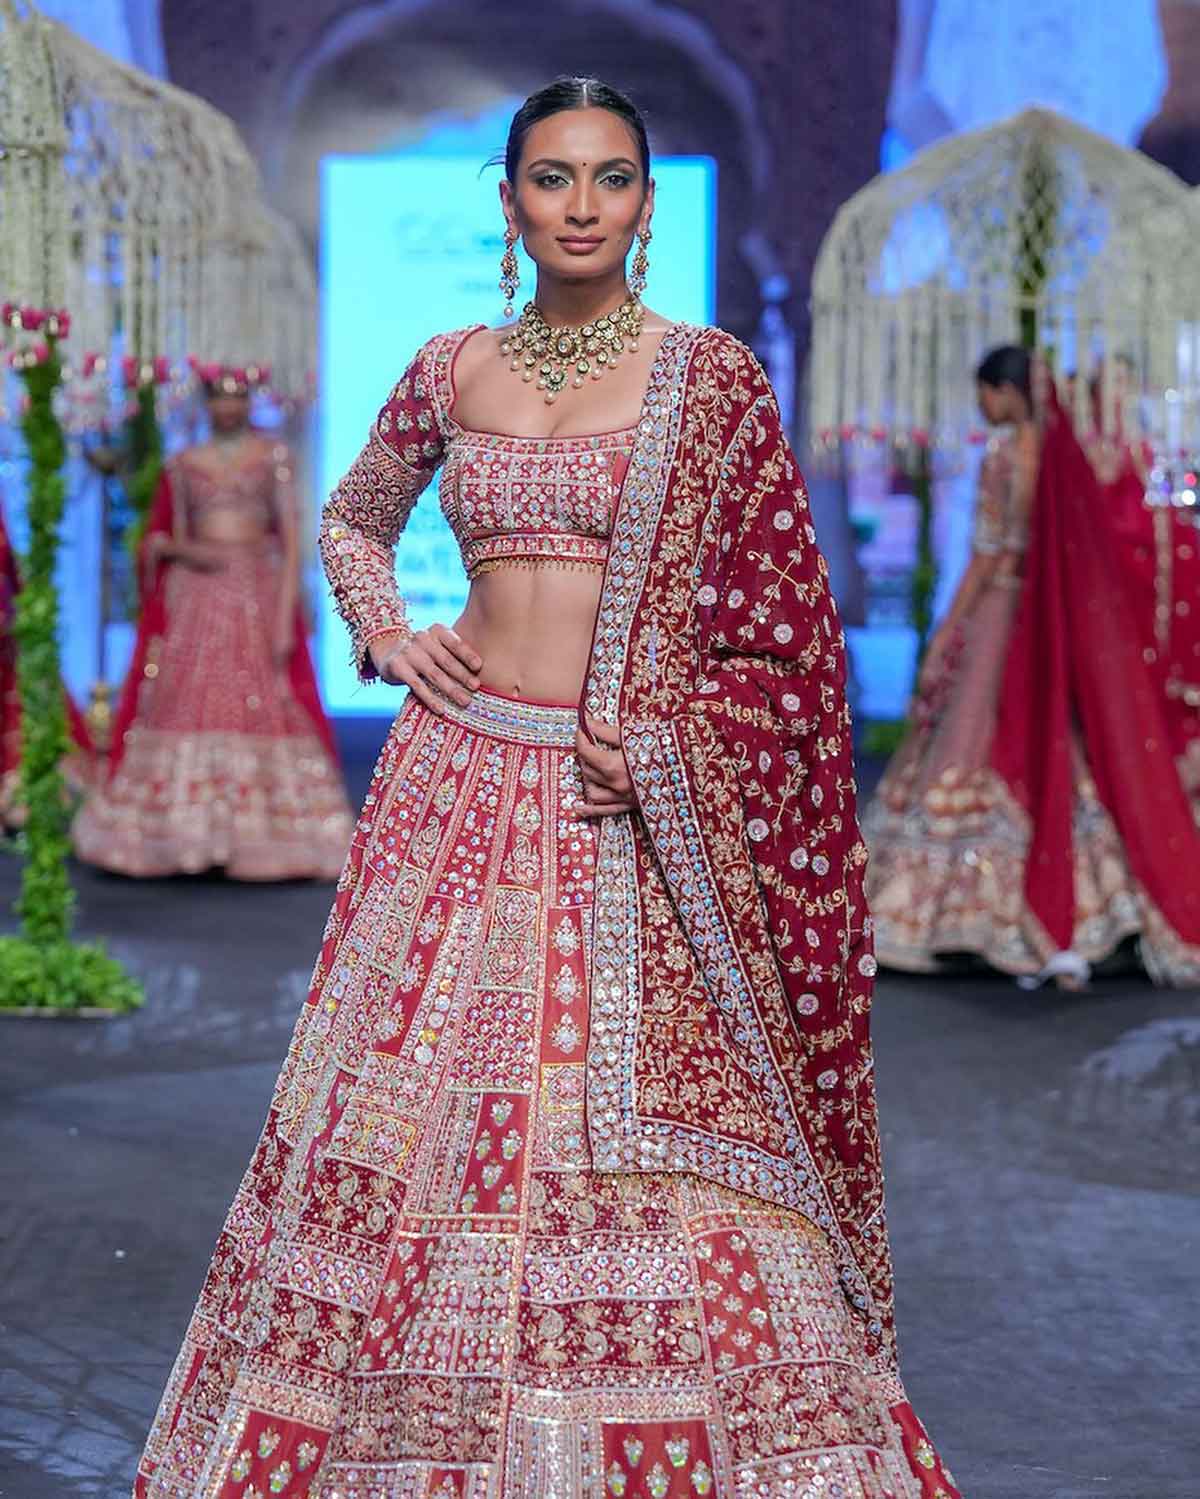 Mangalore Today | Latest titbits of mangalore, udupi - Page  Vaani-Kapoor-turns-blazing-showstopper-in-red-hot-lehenga-choli-at-India -Couture-Week-2023